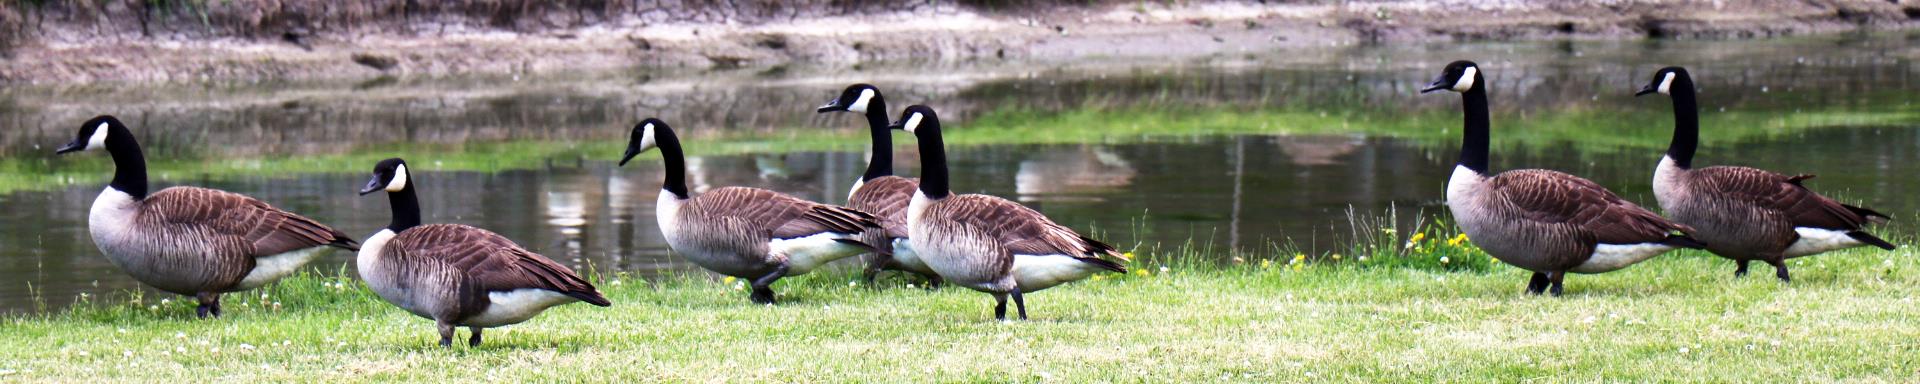 Image of Canada Geese on Mud Creek